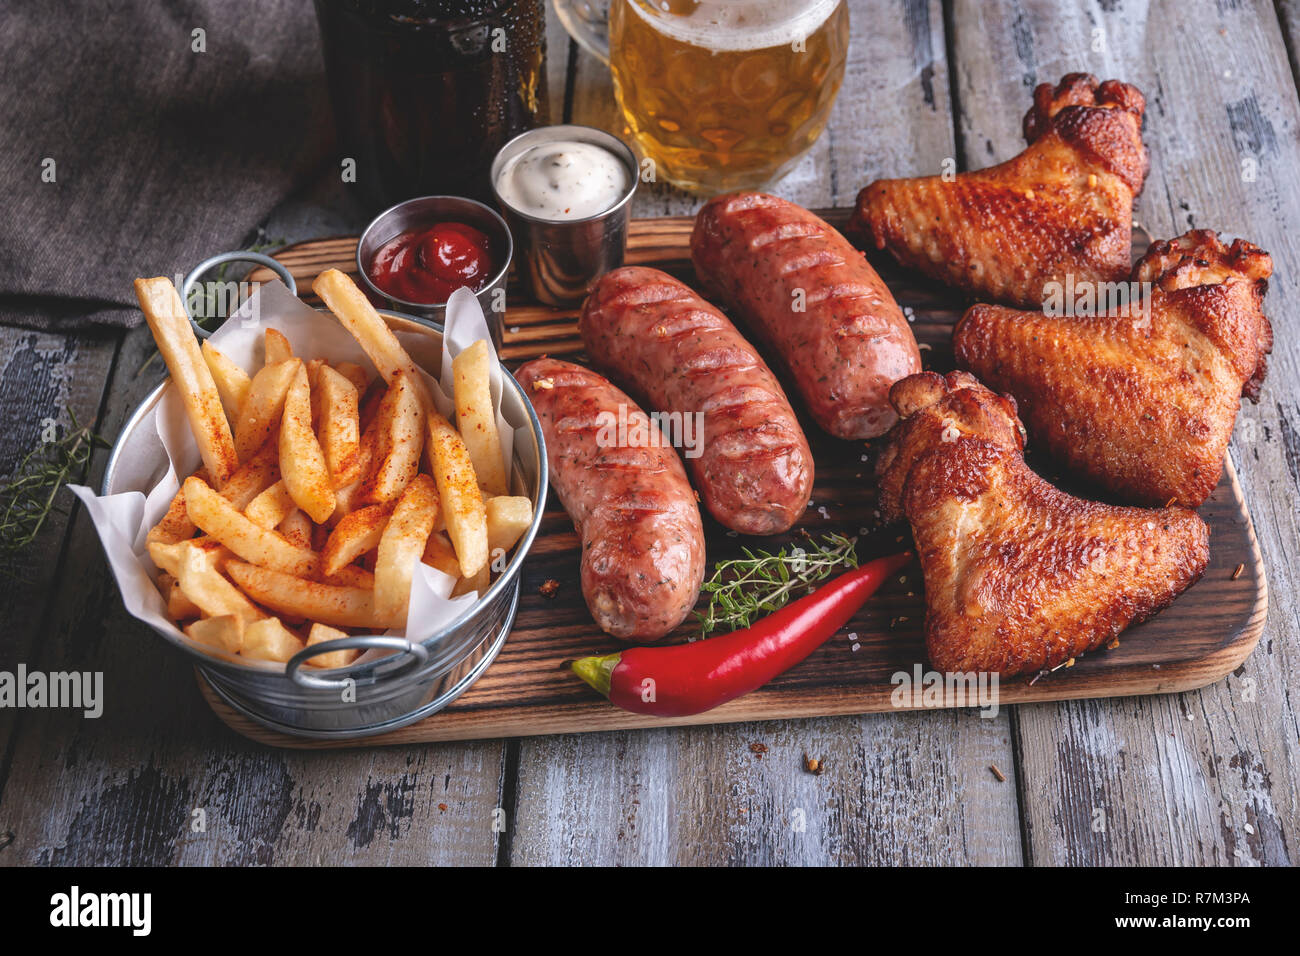 Grilled chicken wings,sausages french fries, white and red sauce on a wooden surface. Stock Photo